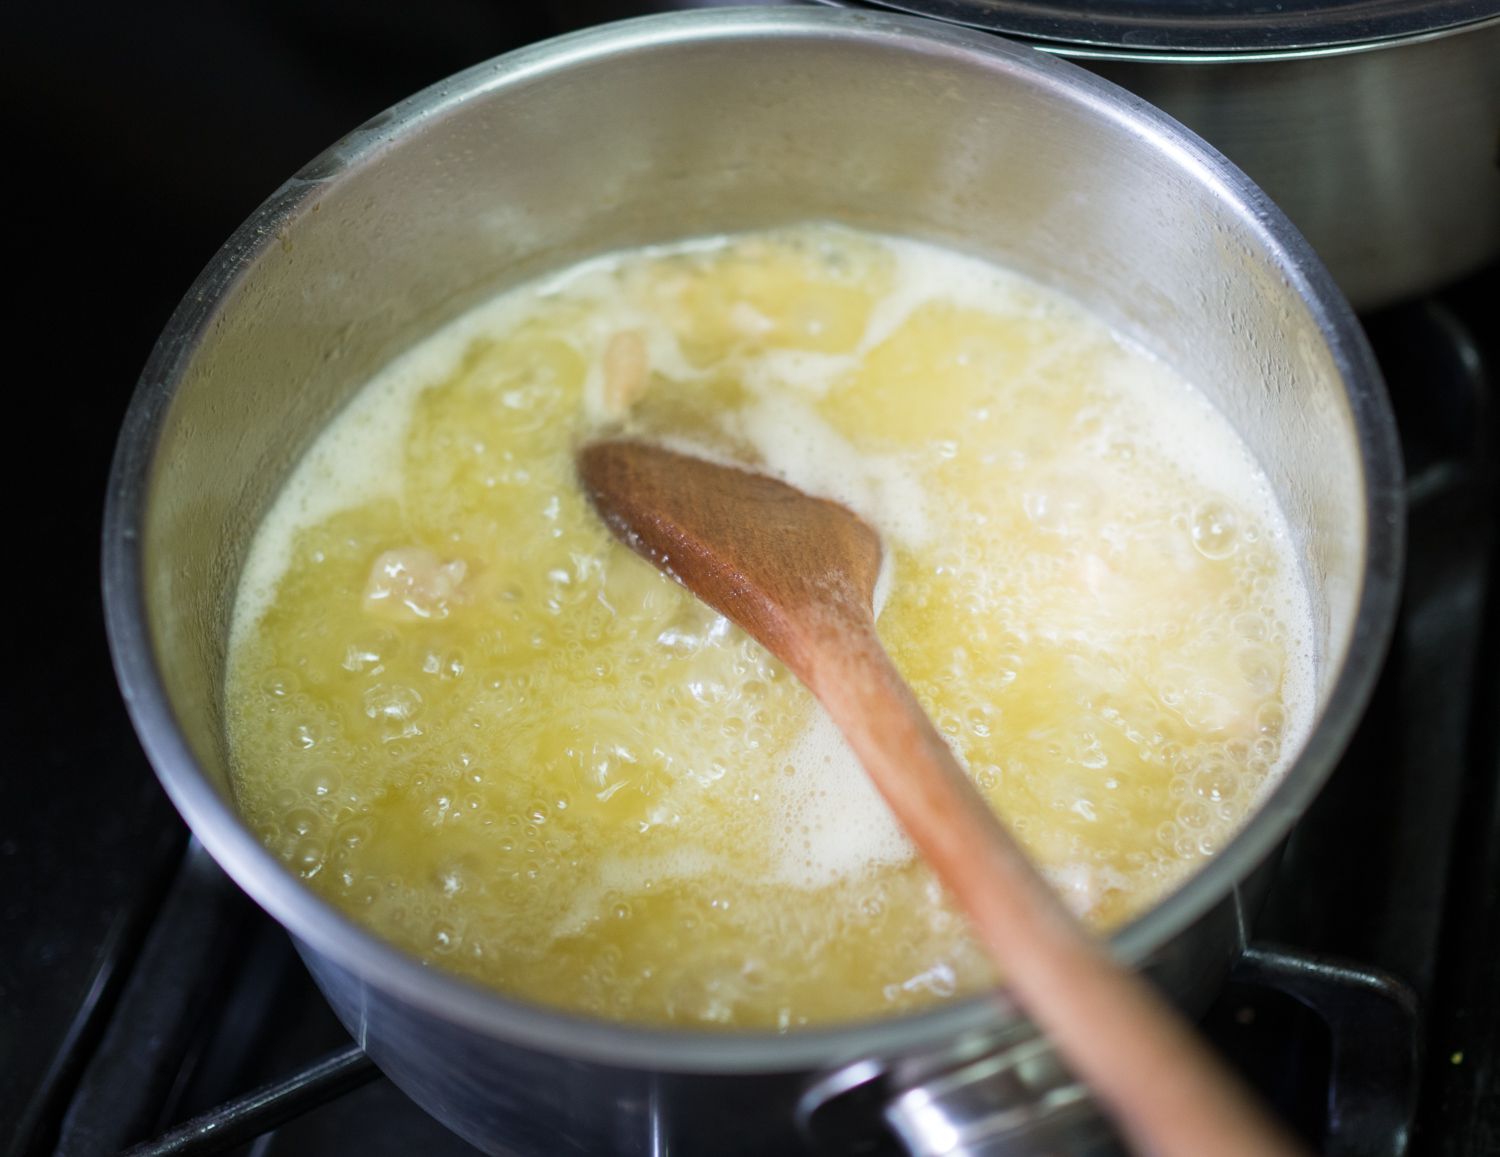 A bubbling saucepan of chicken fat being rendered on a stove. A wooden spoon is stirring the pan.